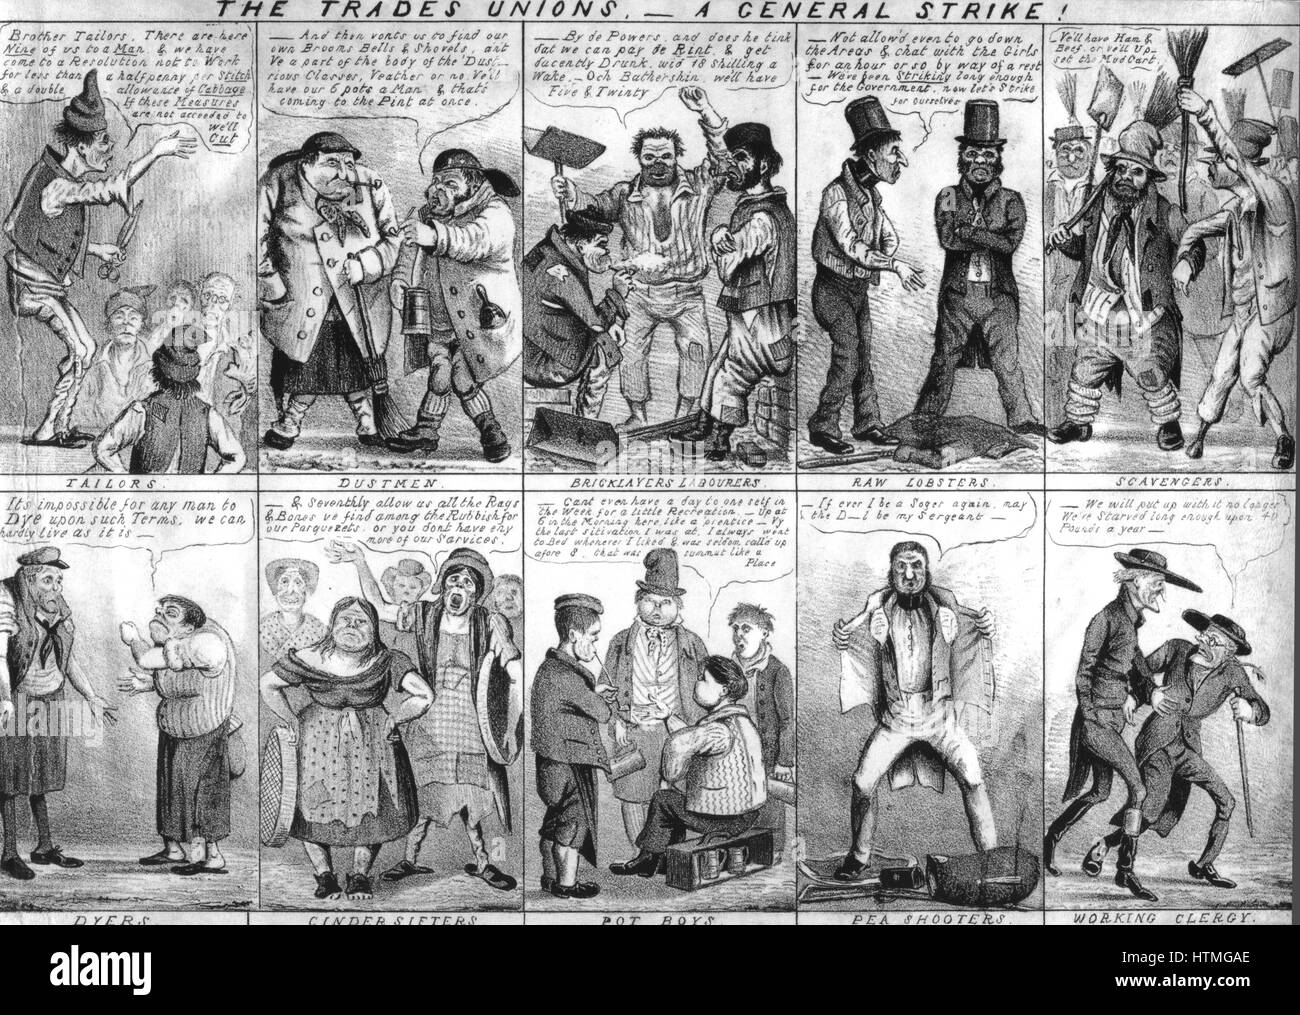 Satirical view of Trade Unions and their demands from tailors and bricklayers to police and clergy. Lithograph 1830s. Stock Photo